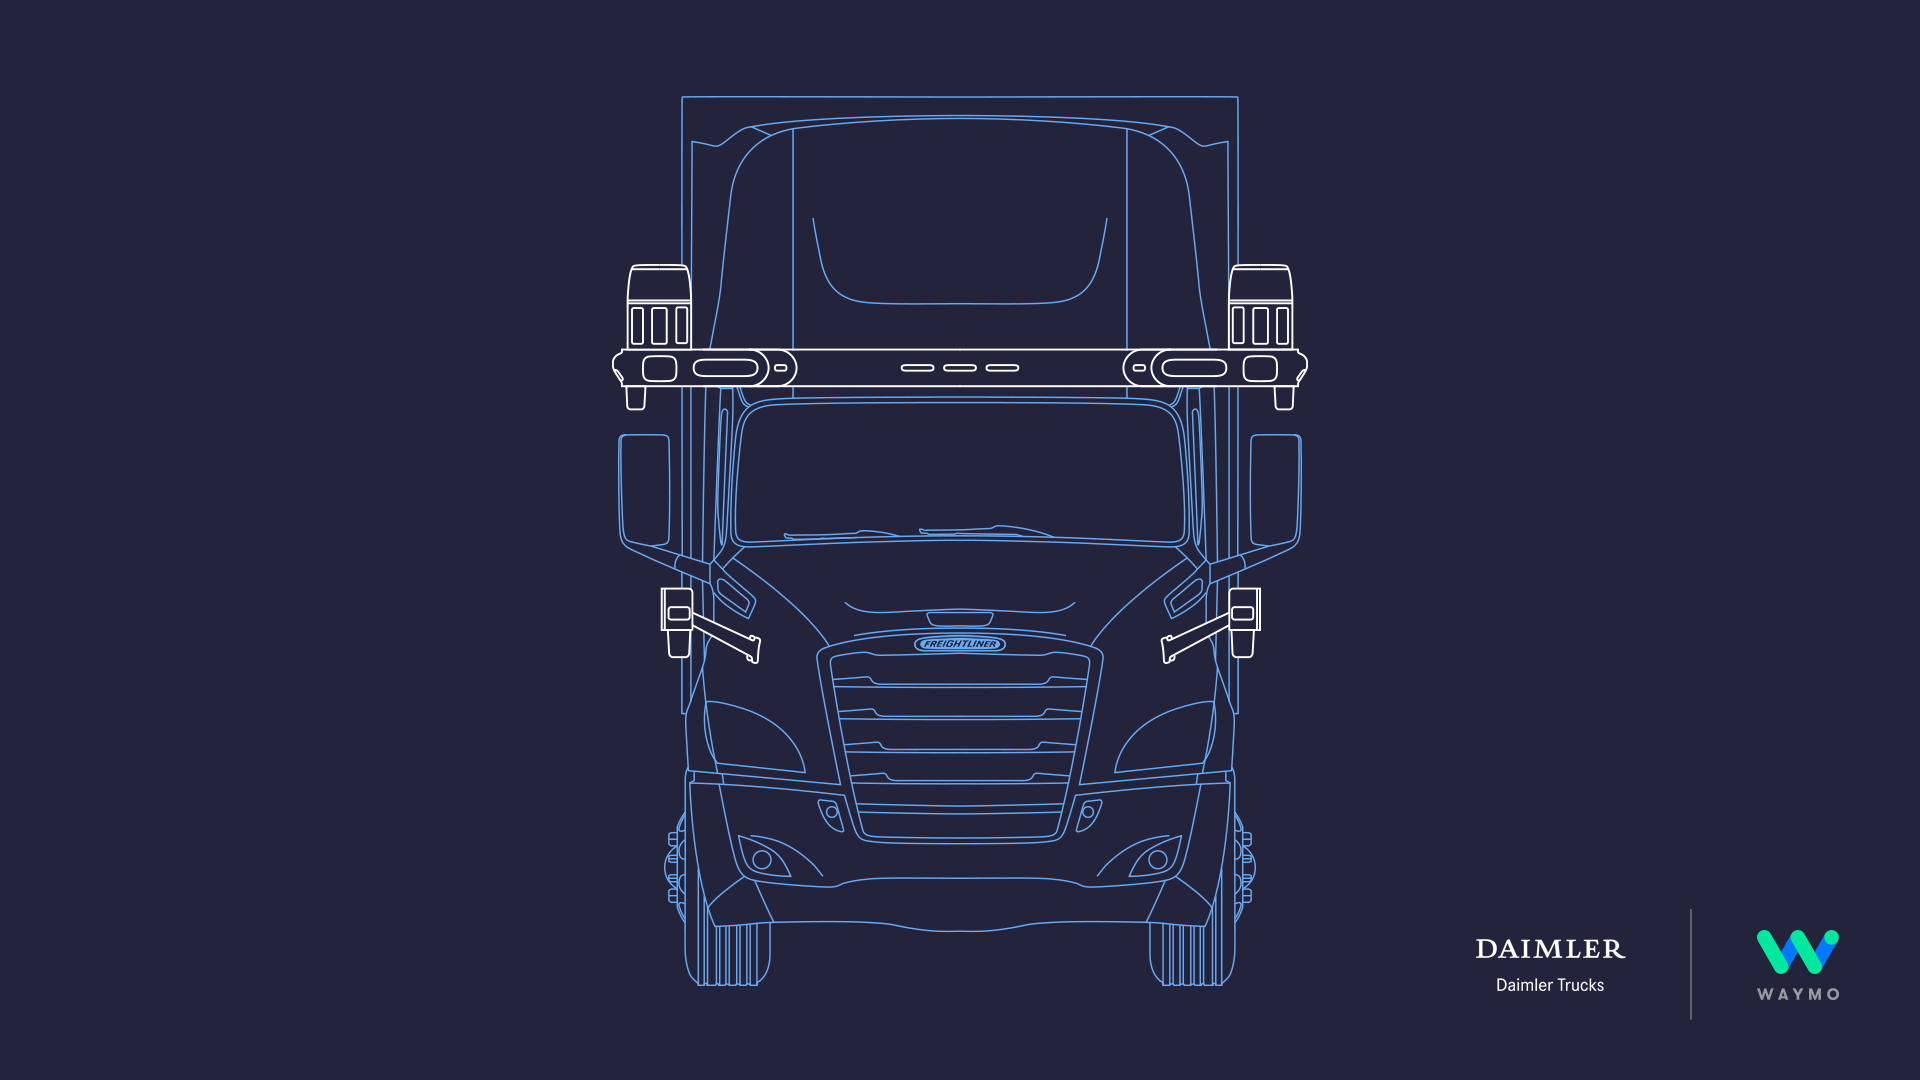 Sketch of a Freightliner semi truck outfitted with Waymo's self-driving technology